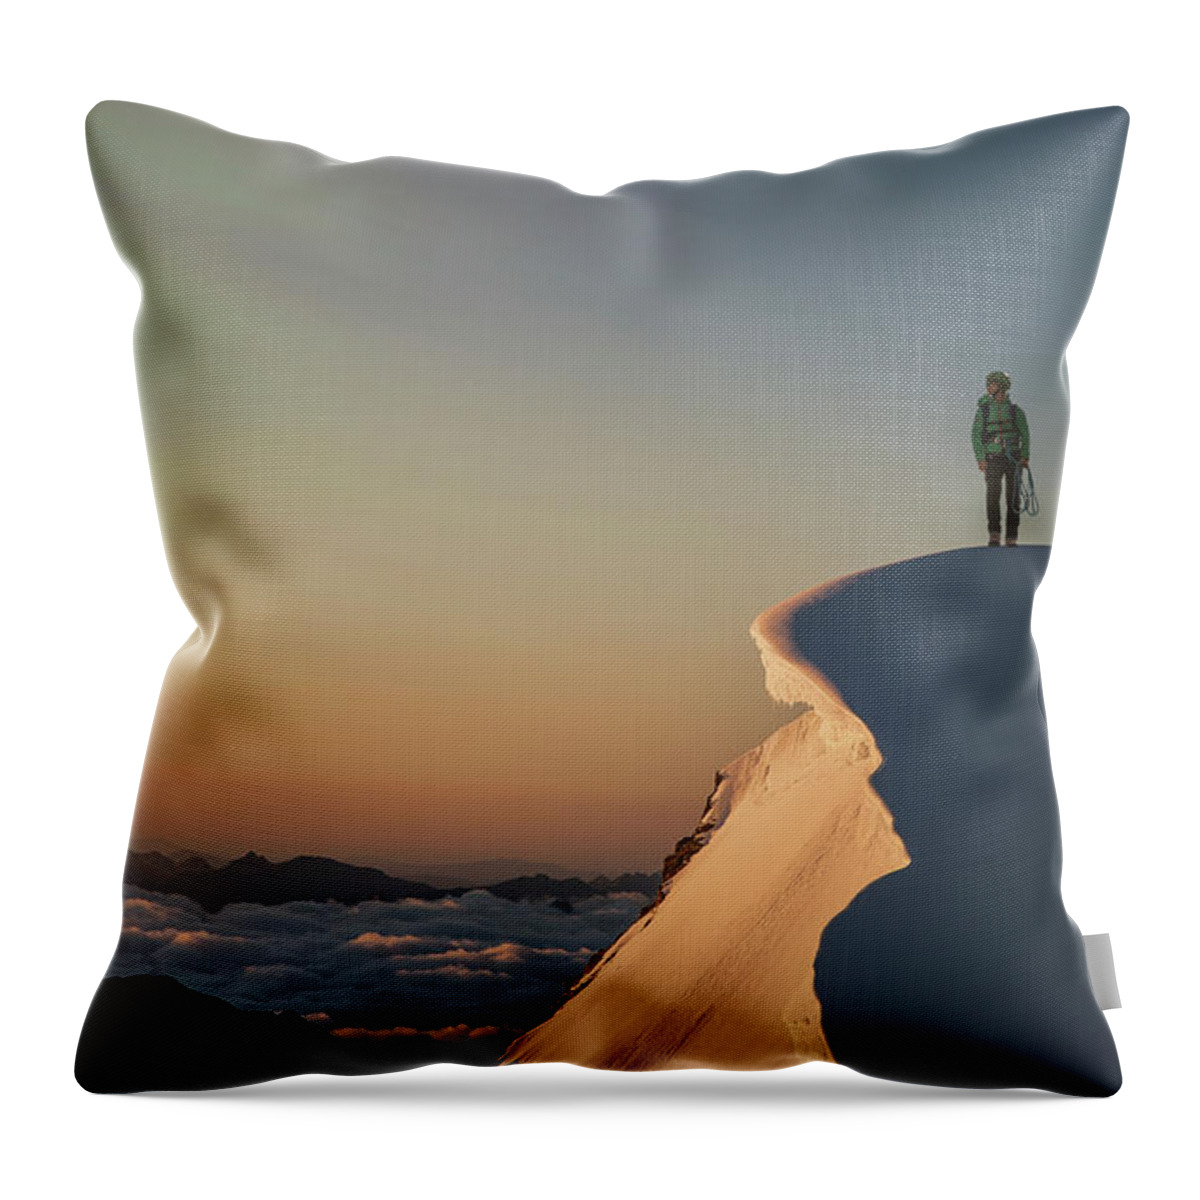 People Throw Pillow featuring the photograph A Female Climber On A Snowy Mountaintop by Buena Vista Images